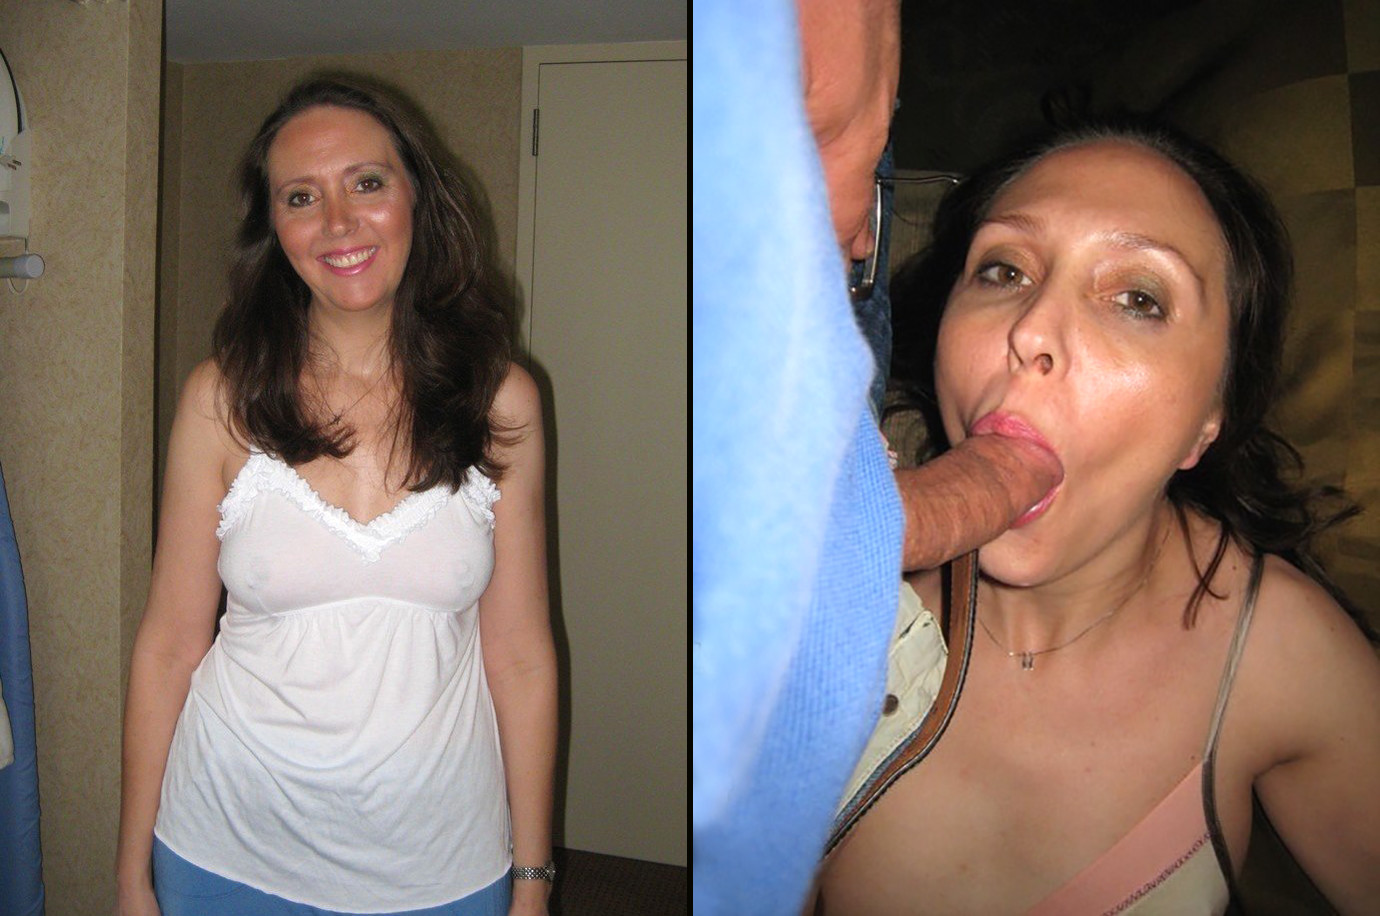 Mature Blowjob Before And After - Before And After Milf Blowjob Facial | Niche Top Mature